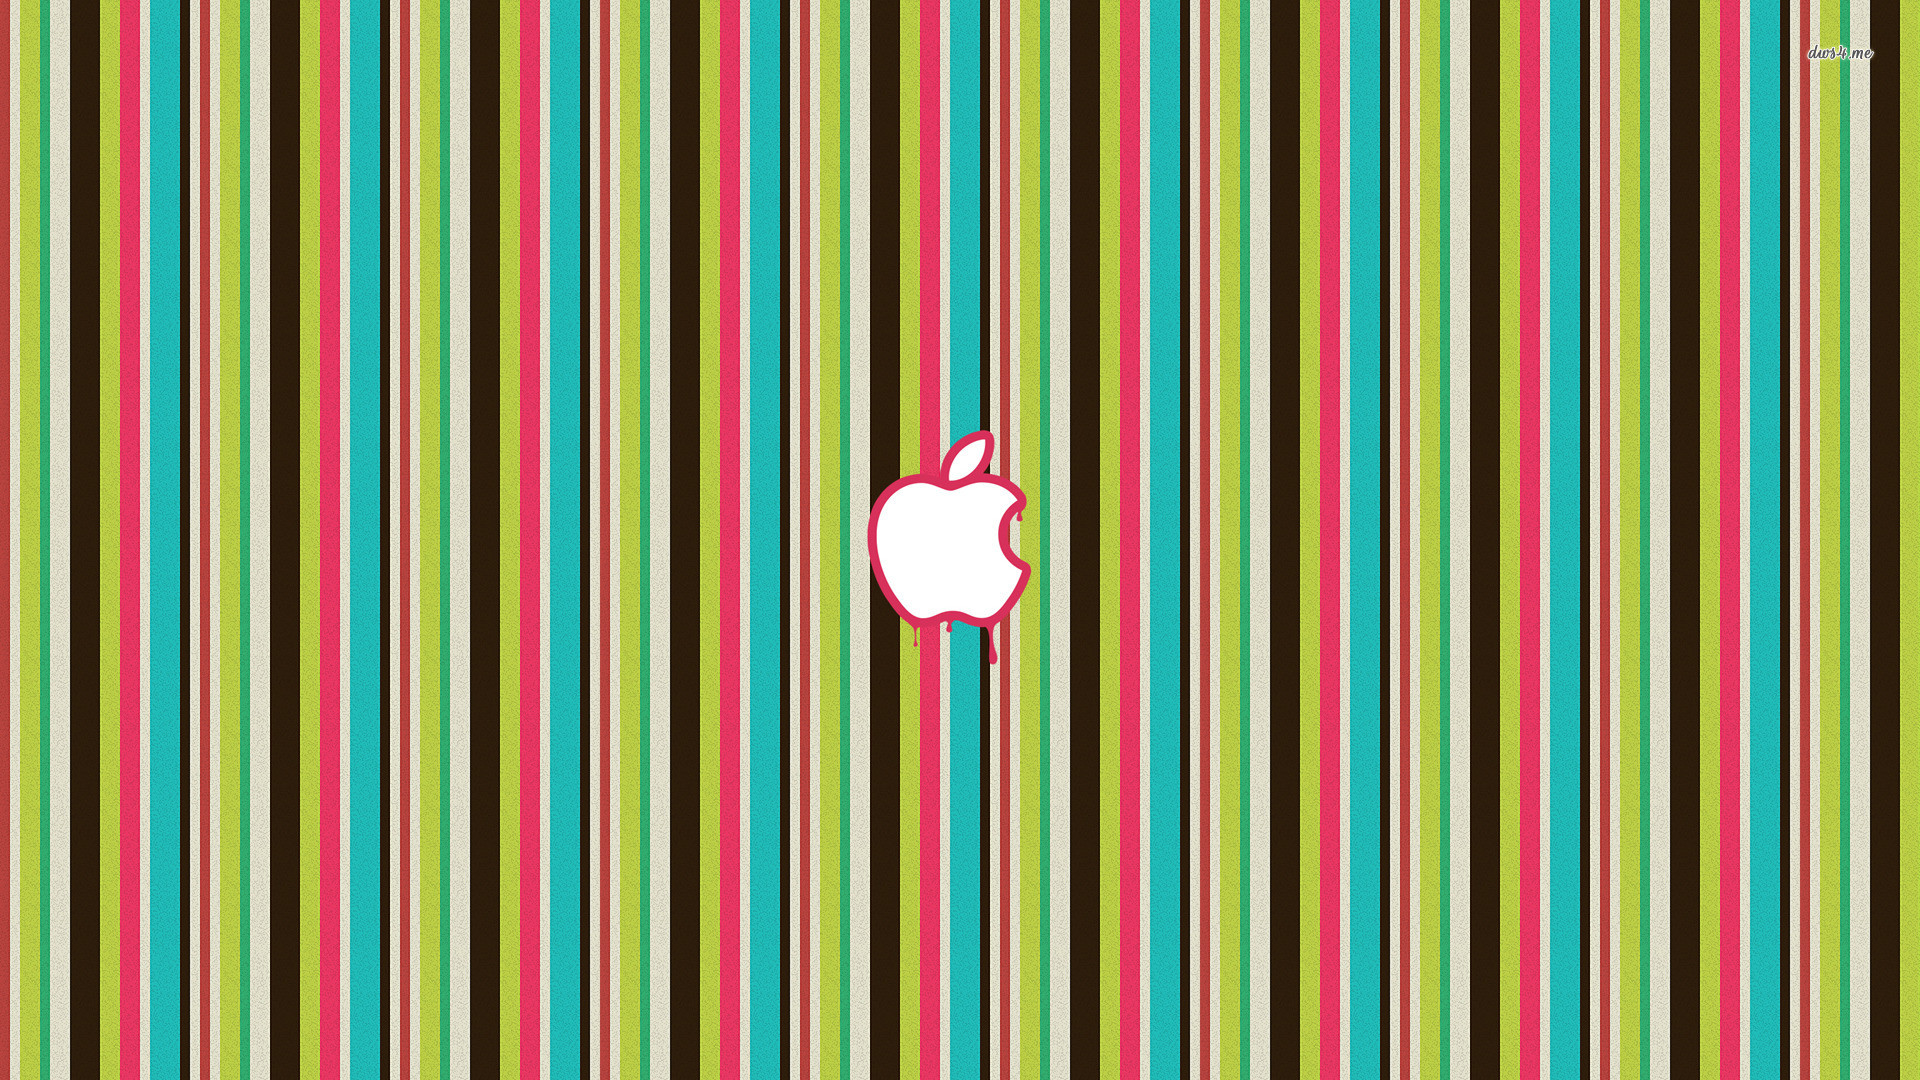 1920x1080 Colorful striped Apple logo Colorful Apple Mobile Phone Wallpaper Hd Array